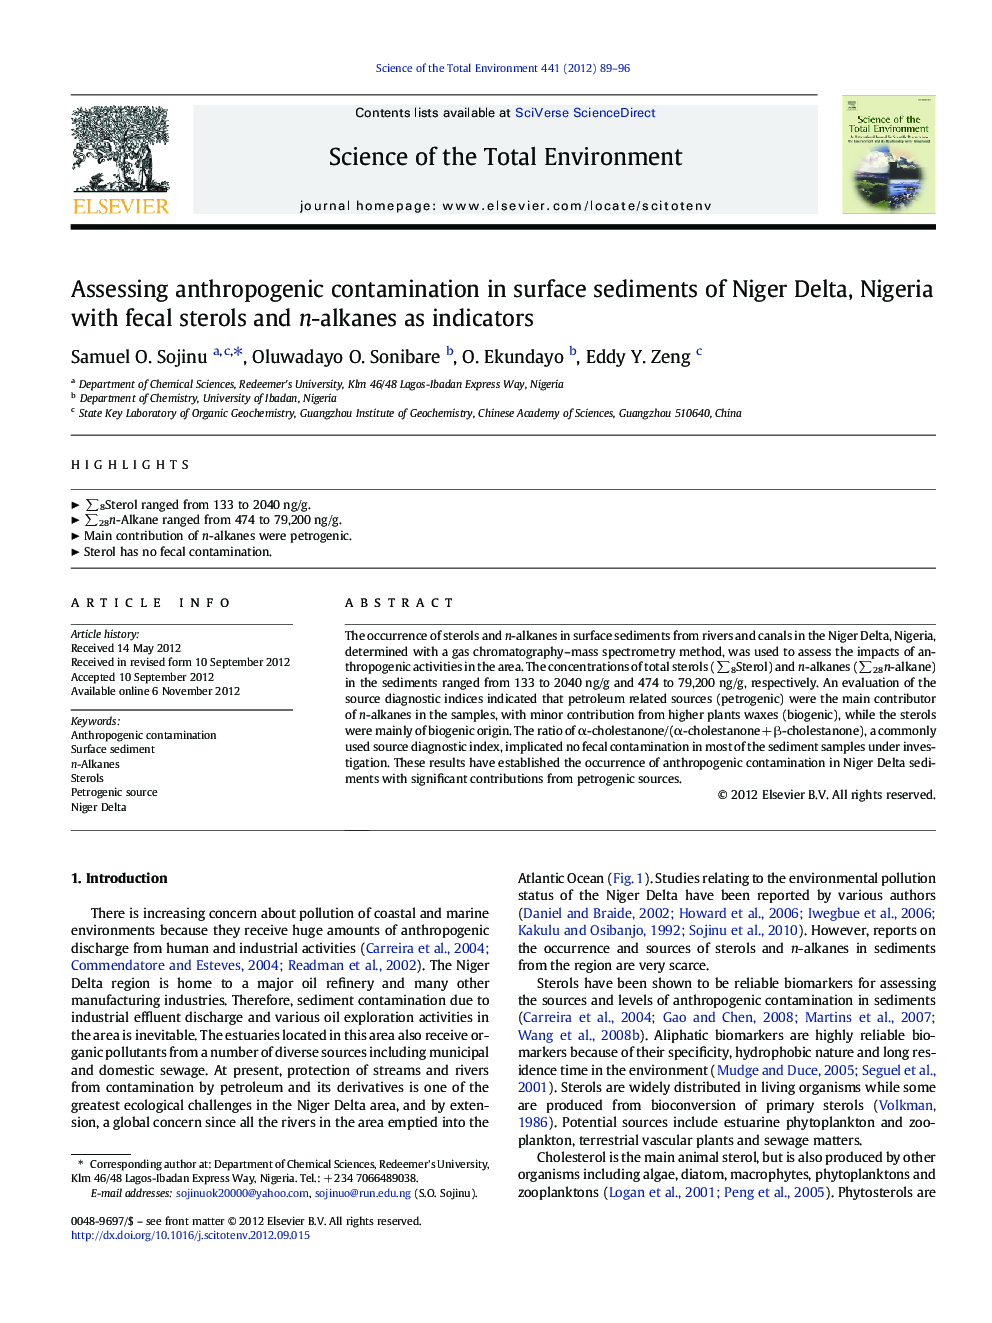 Assessing anthropogenic contamination in surface sediments of Niger Delta, Nigeria with fecal sterols and n-alkanes as indicators